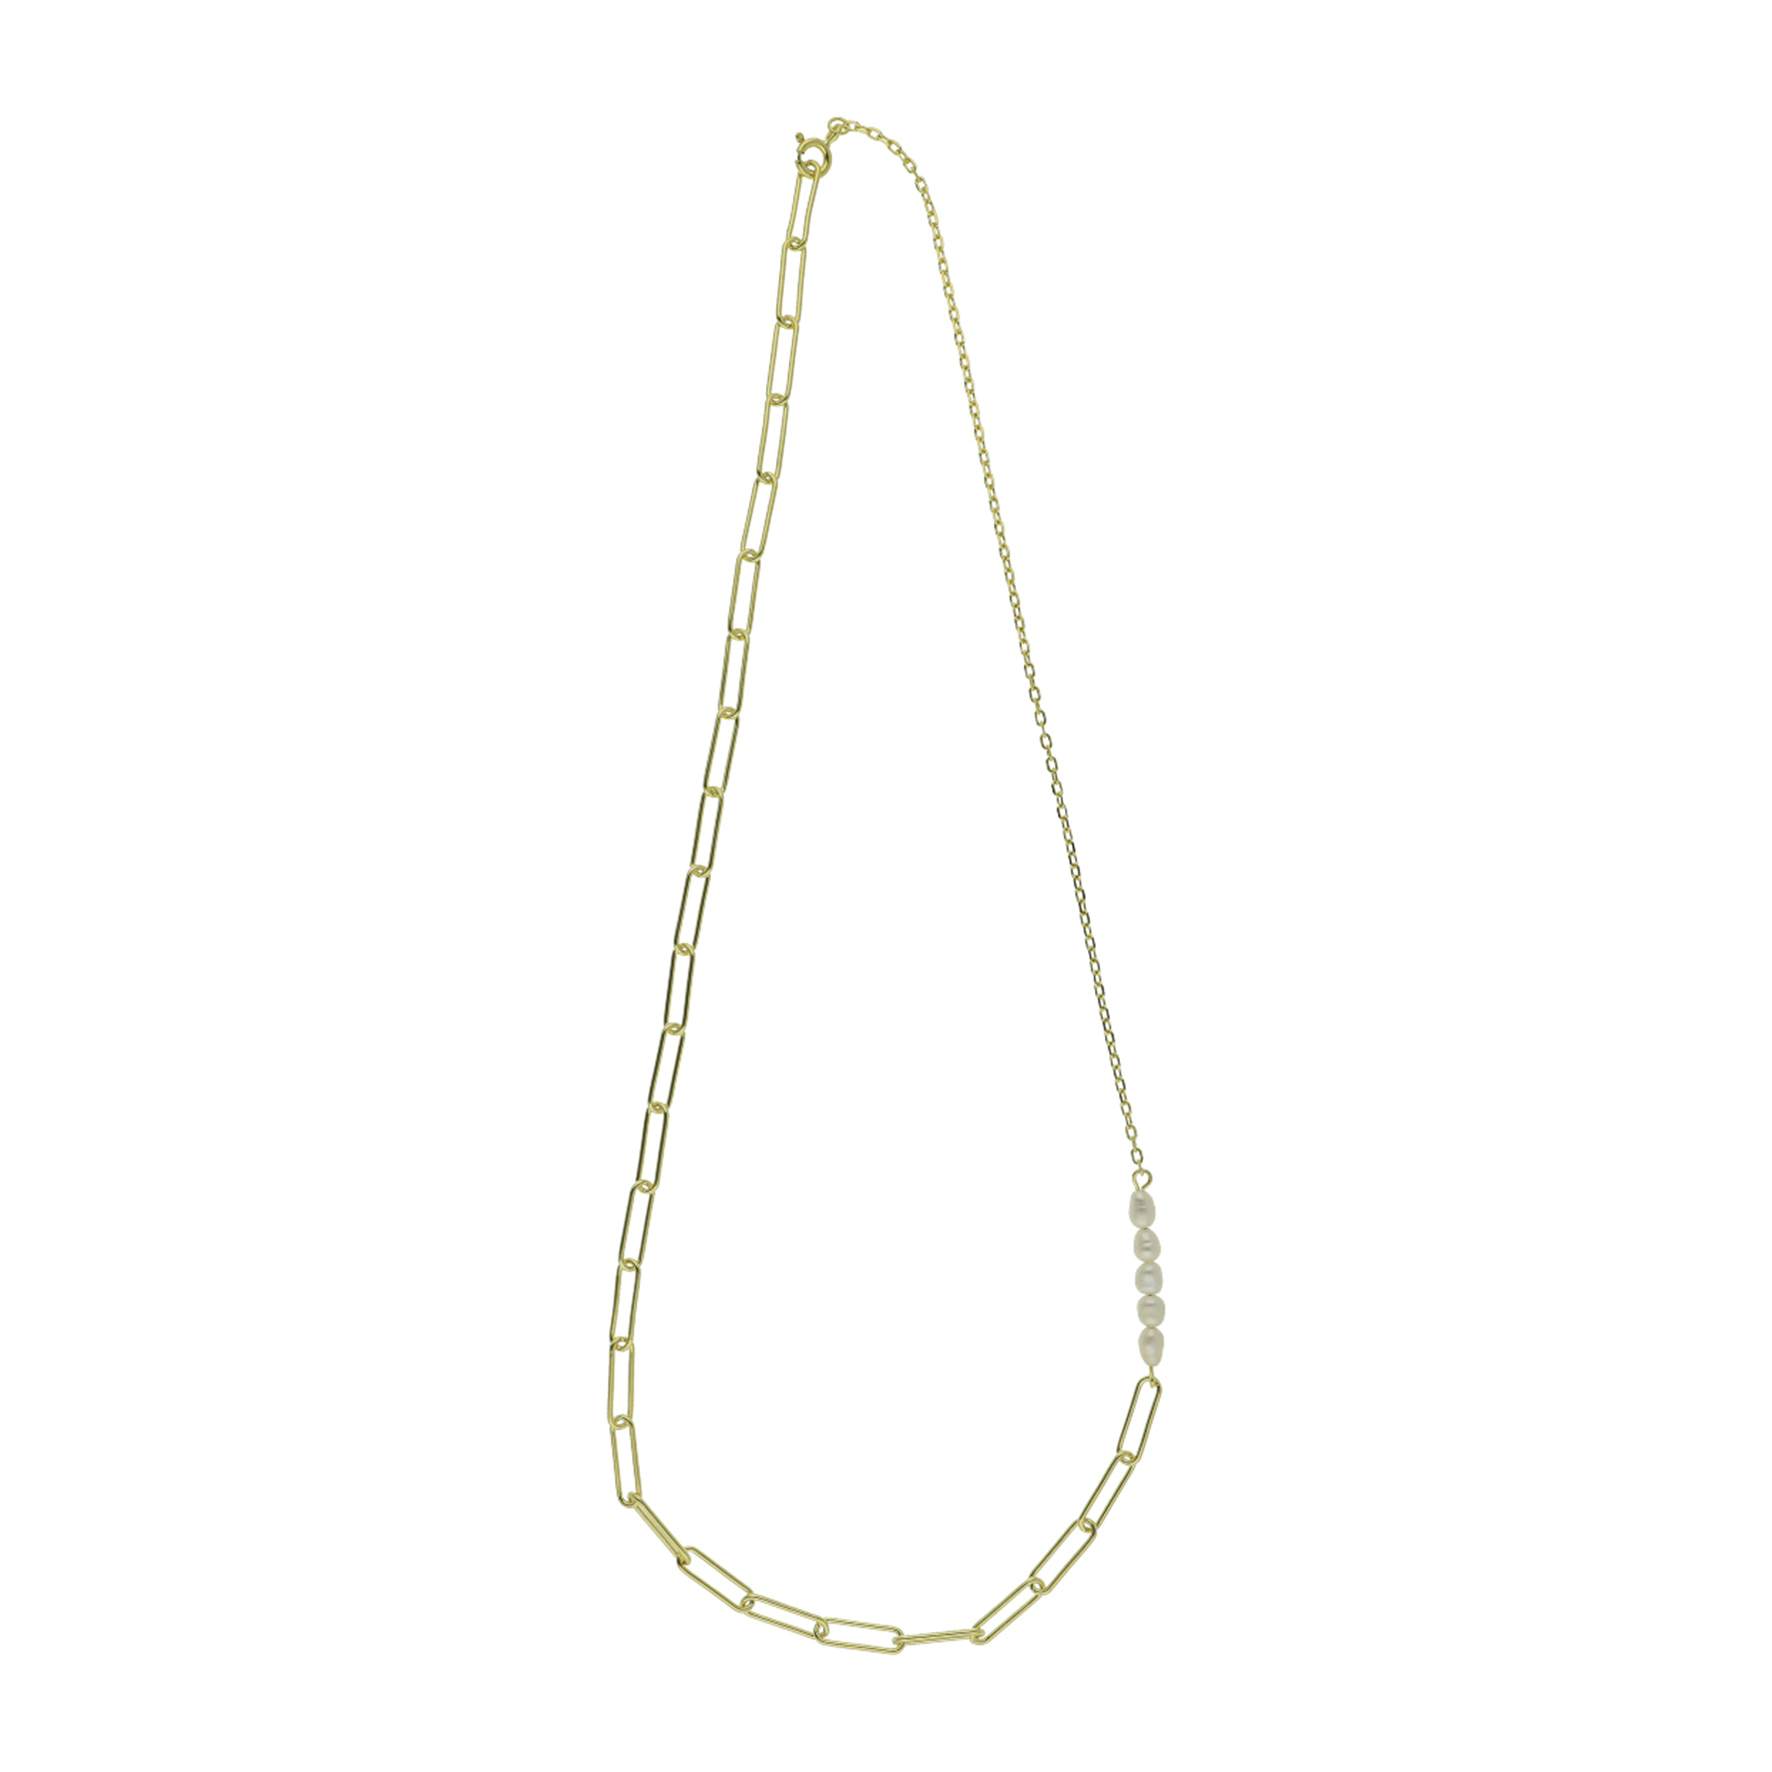 Dicte Pearl Necklace from Nuni Copenhagen in Goldplated-Silver Sterling 925